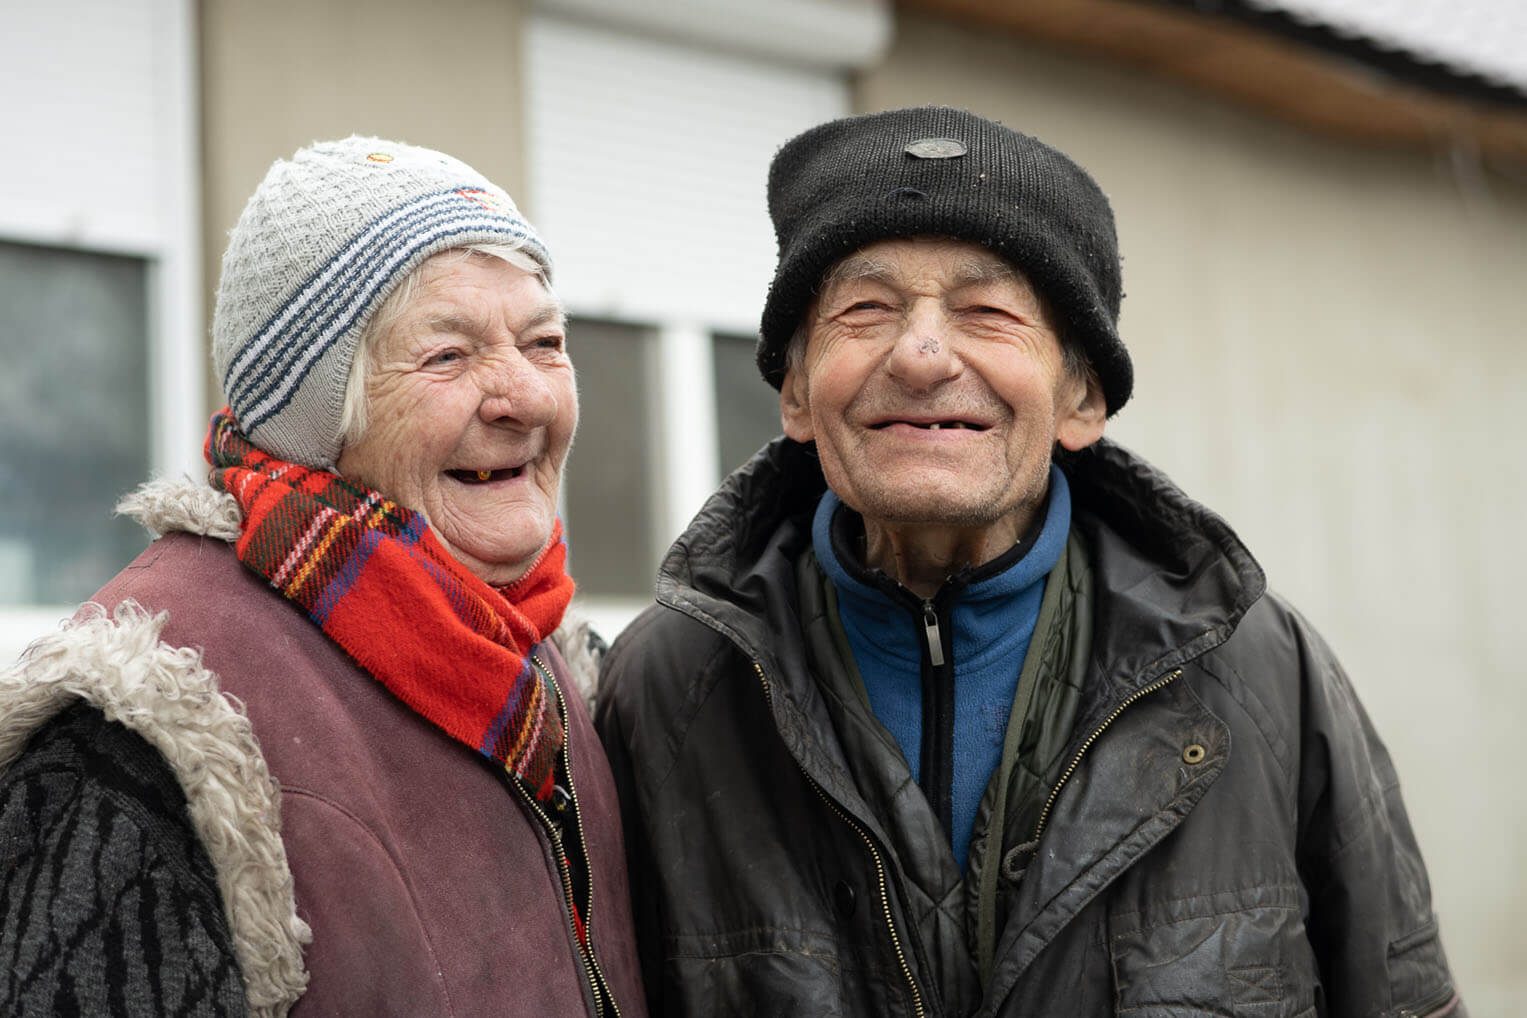 Natalya and Vitaliy have been married 60 years and have seen much suffering over their lifetime.